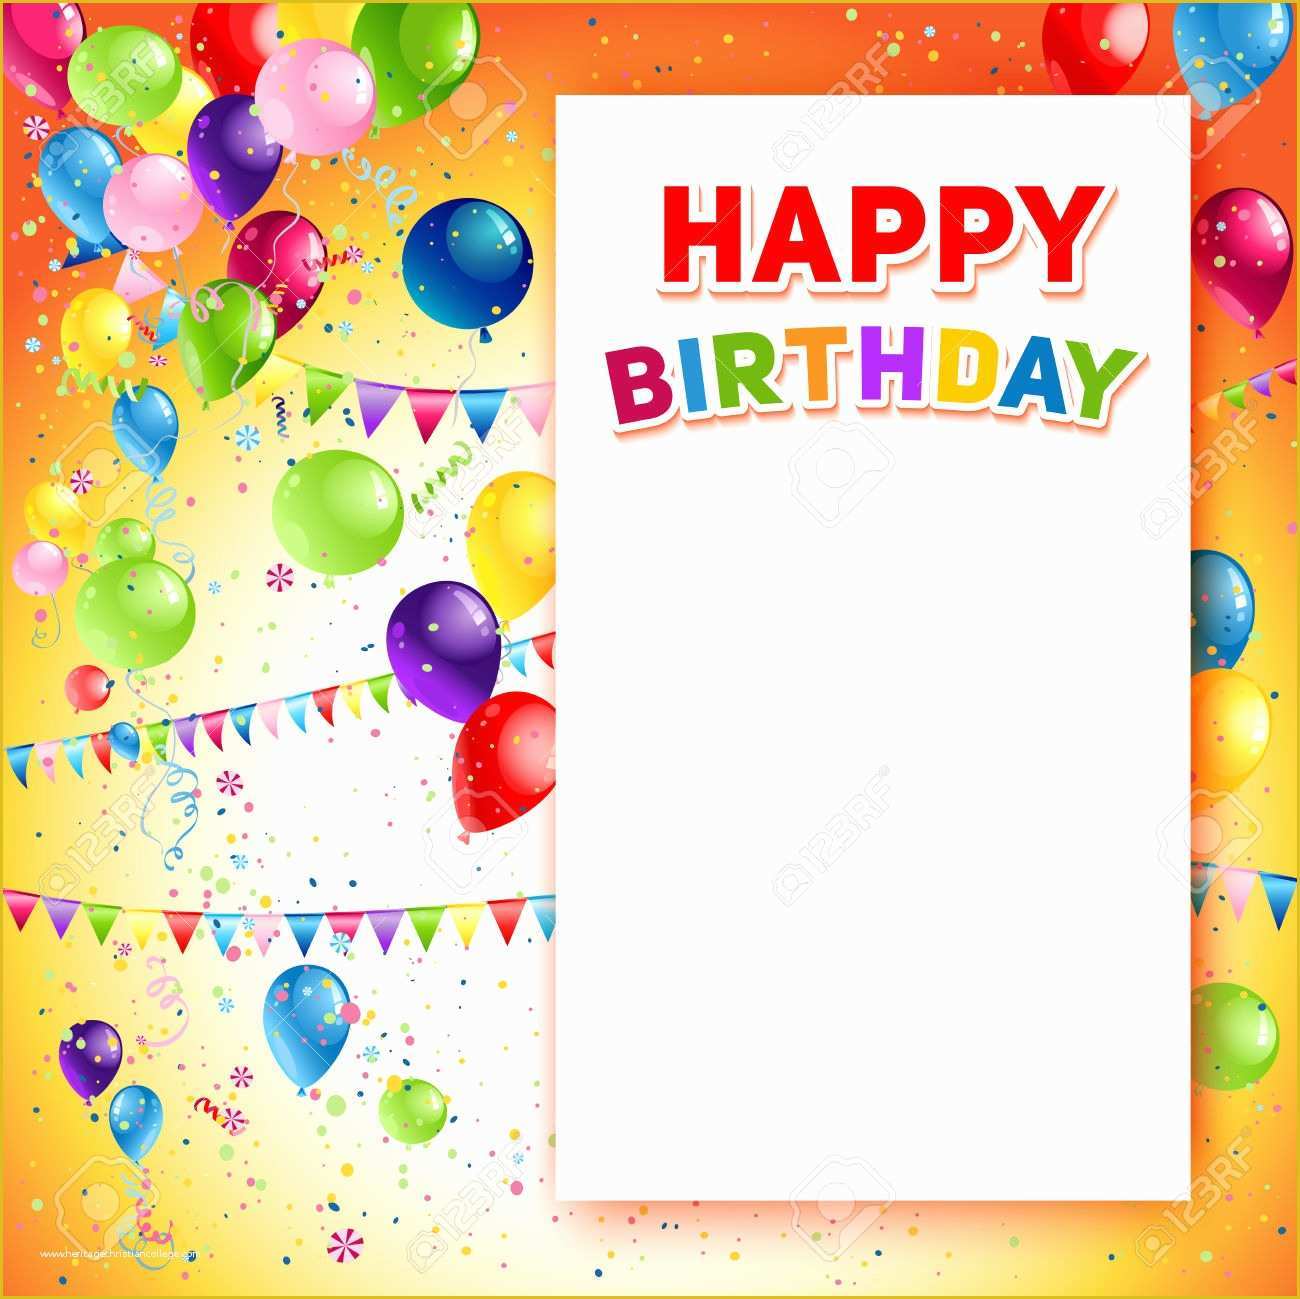 birthday template photoshop free download